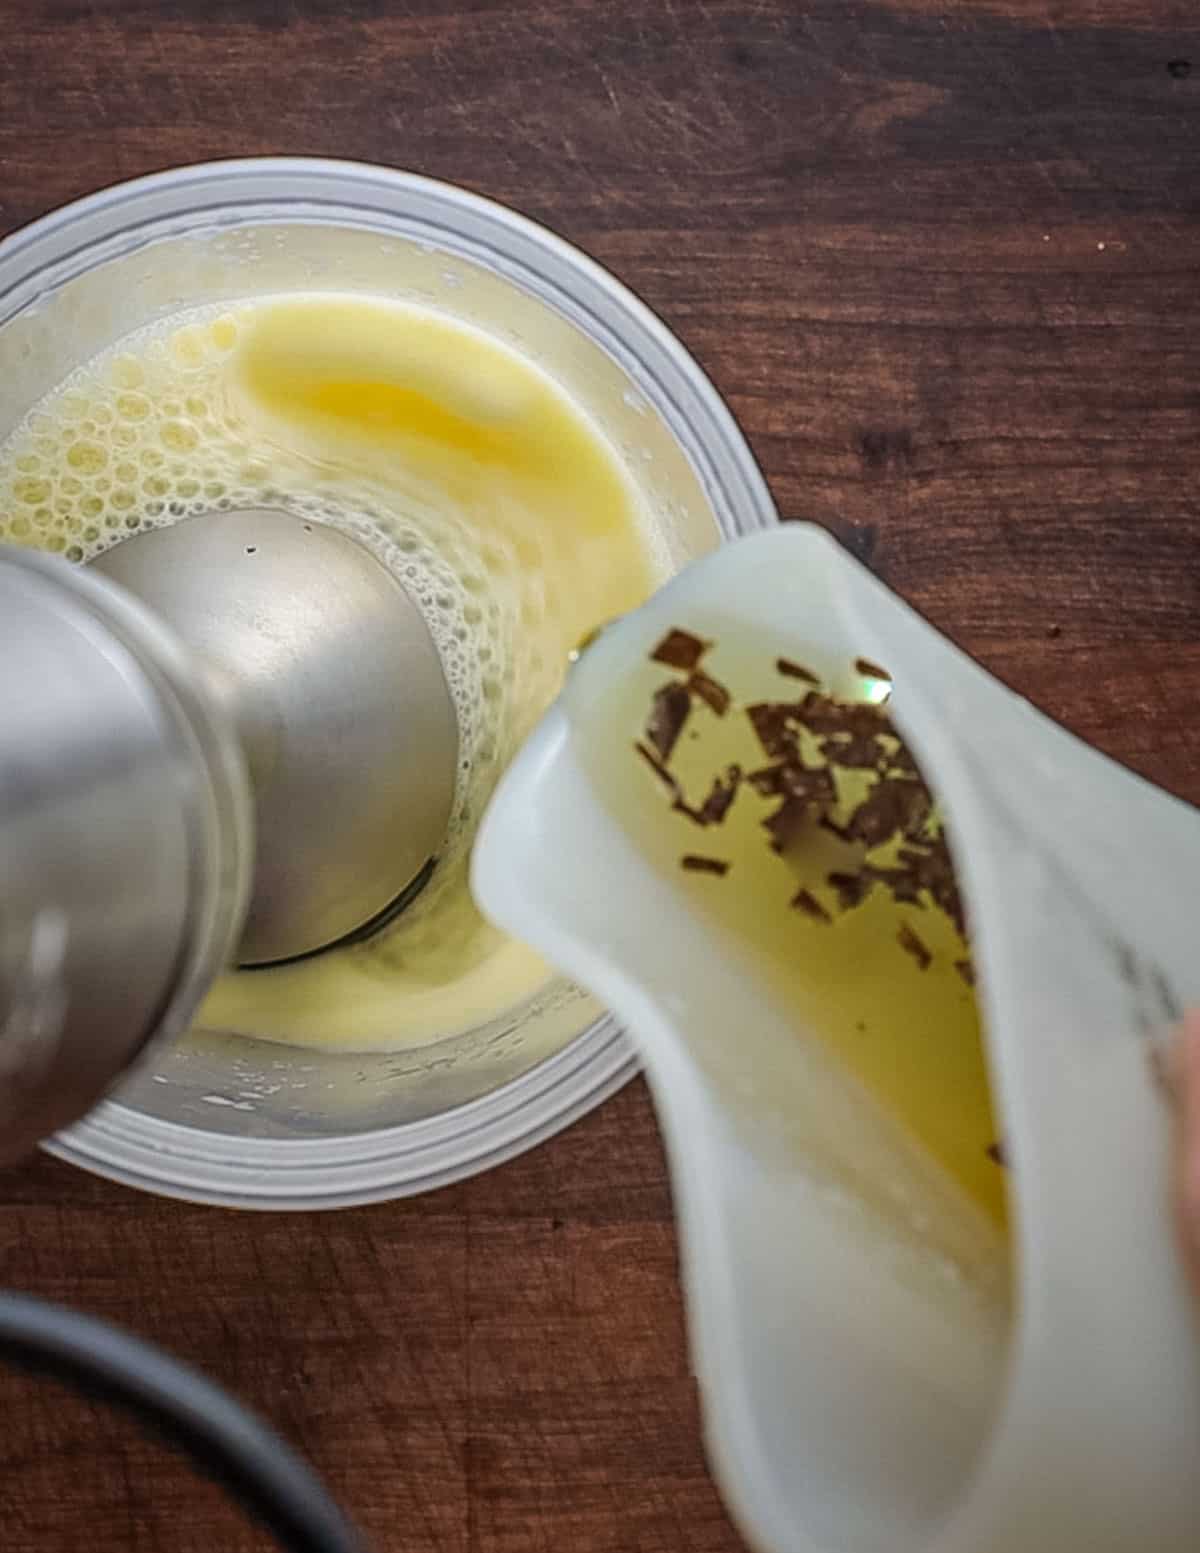 Slowly pouring truffle infused olive oil into container of egg being pureed with a hand blender. 